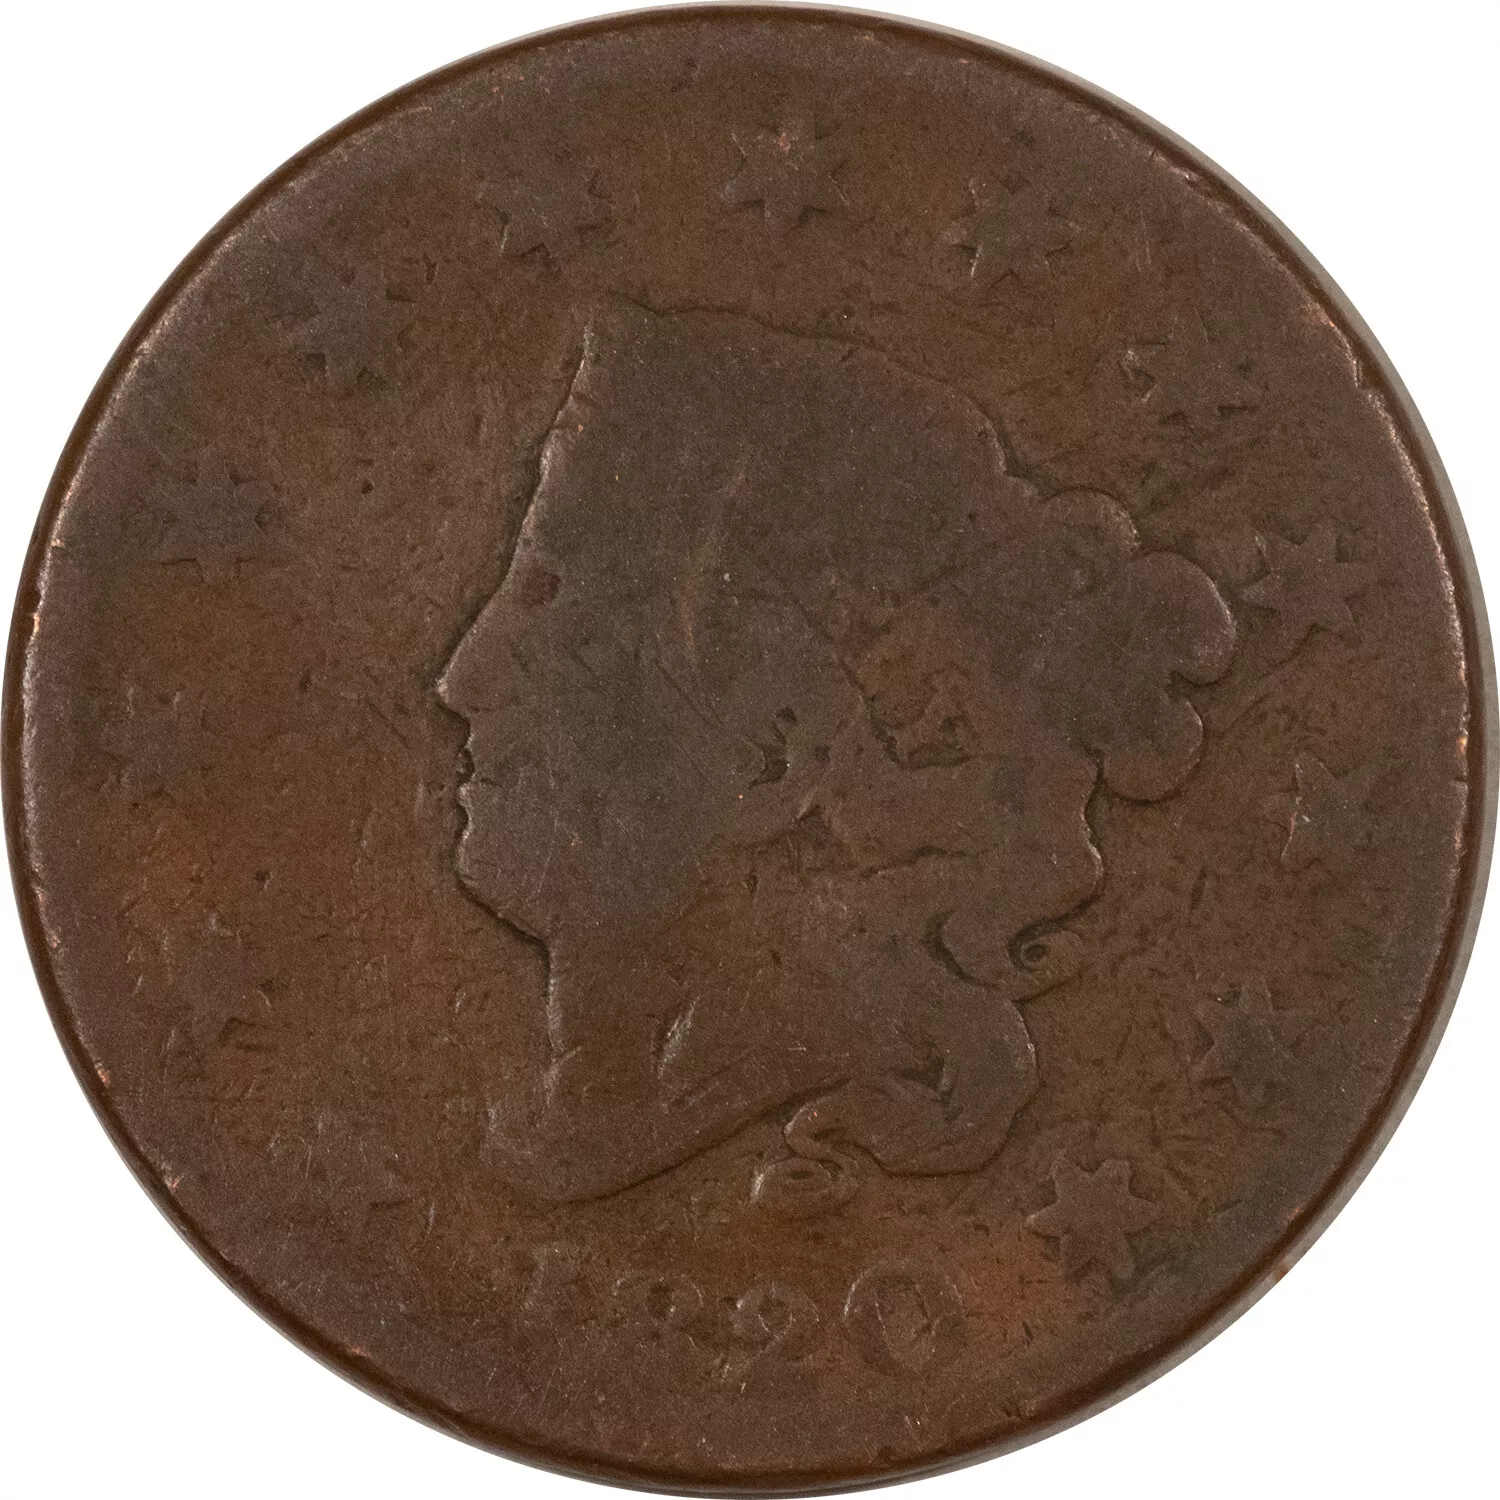 1820 CORONET HEAD LARGE CENT - CIRCULATED, LOW GRADE!